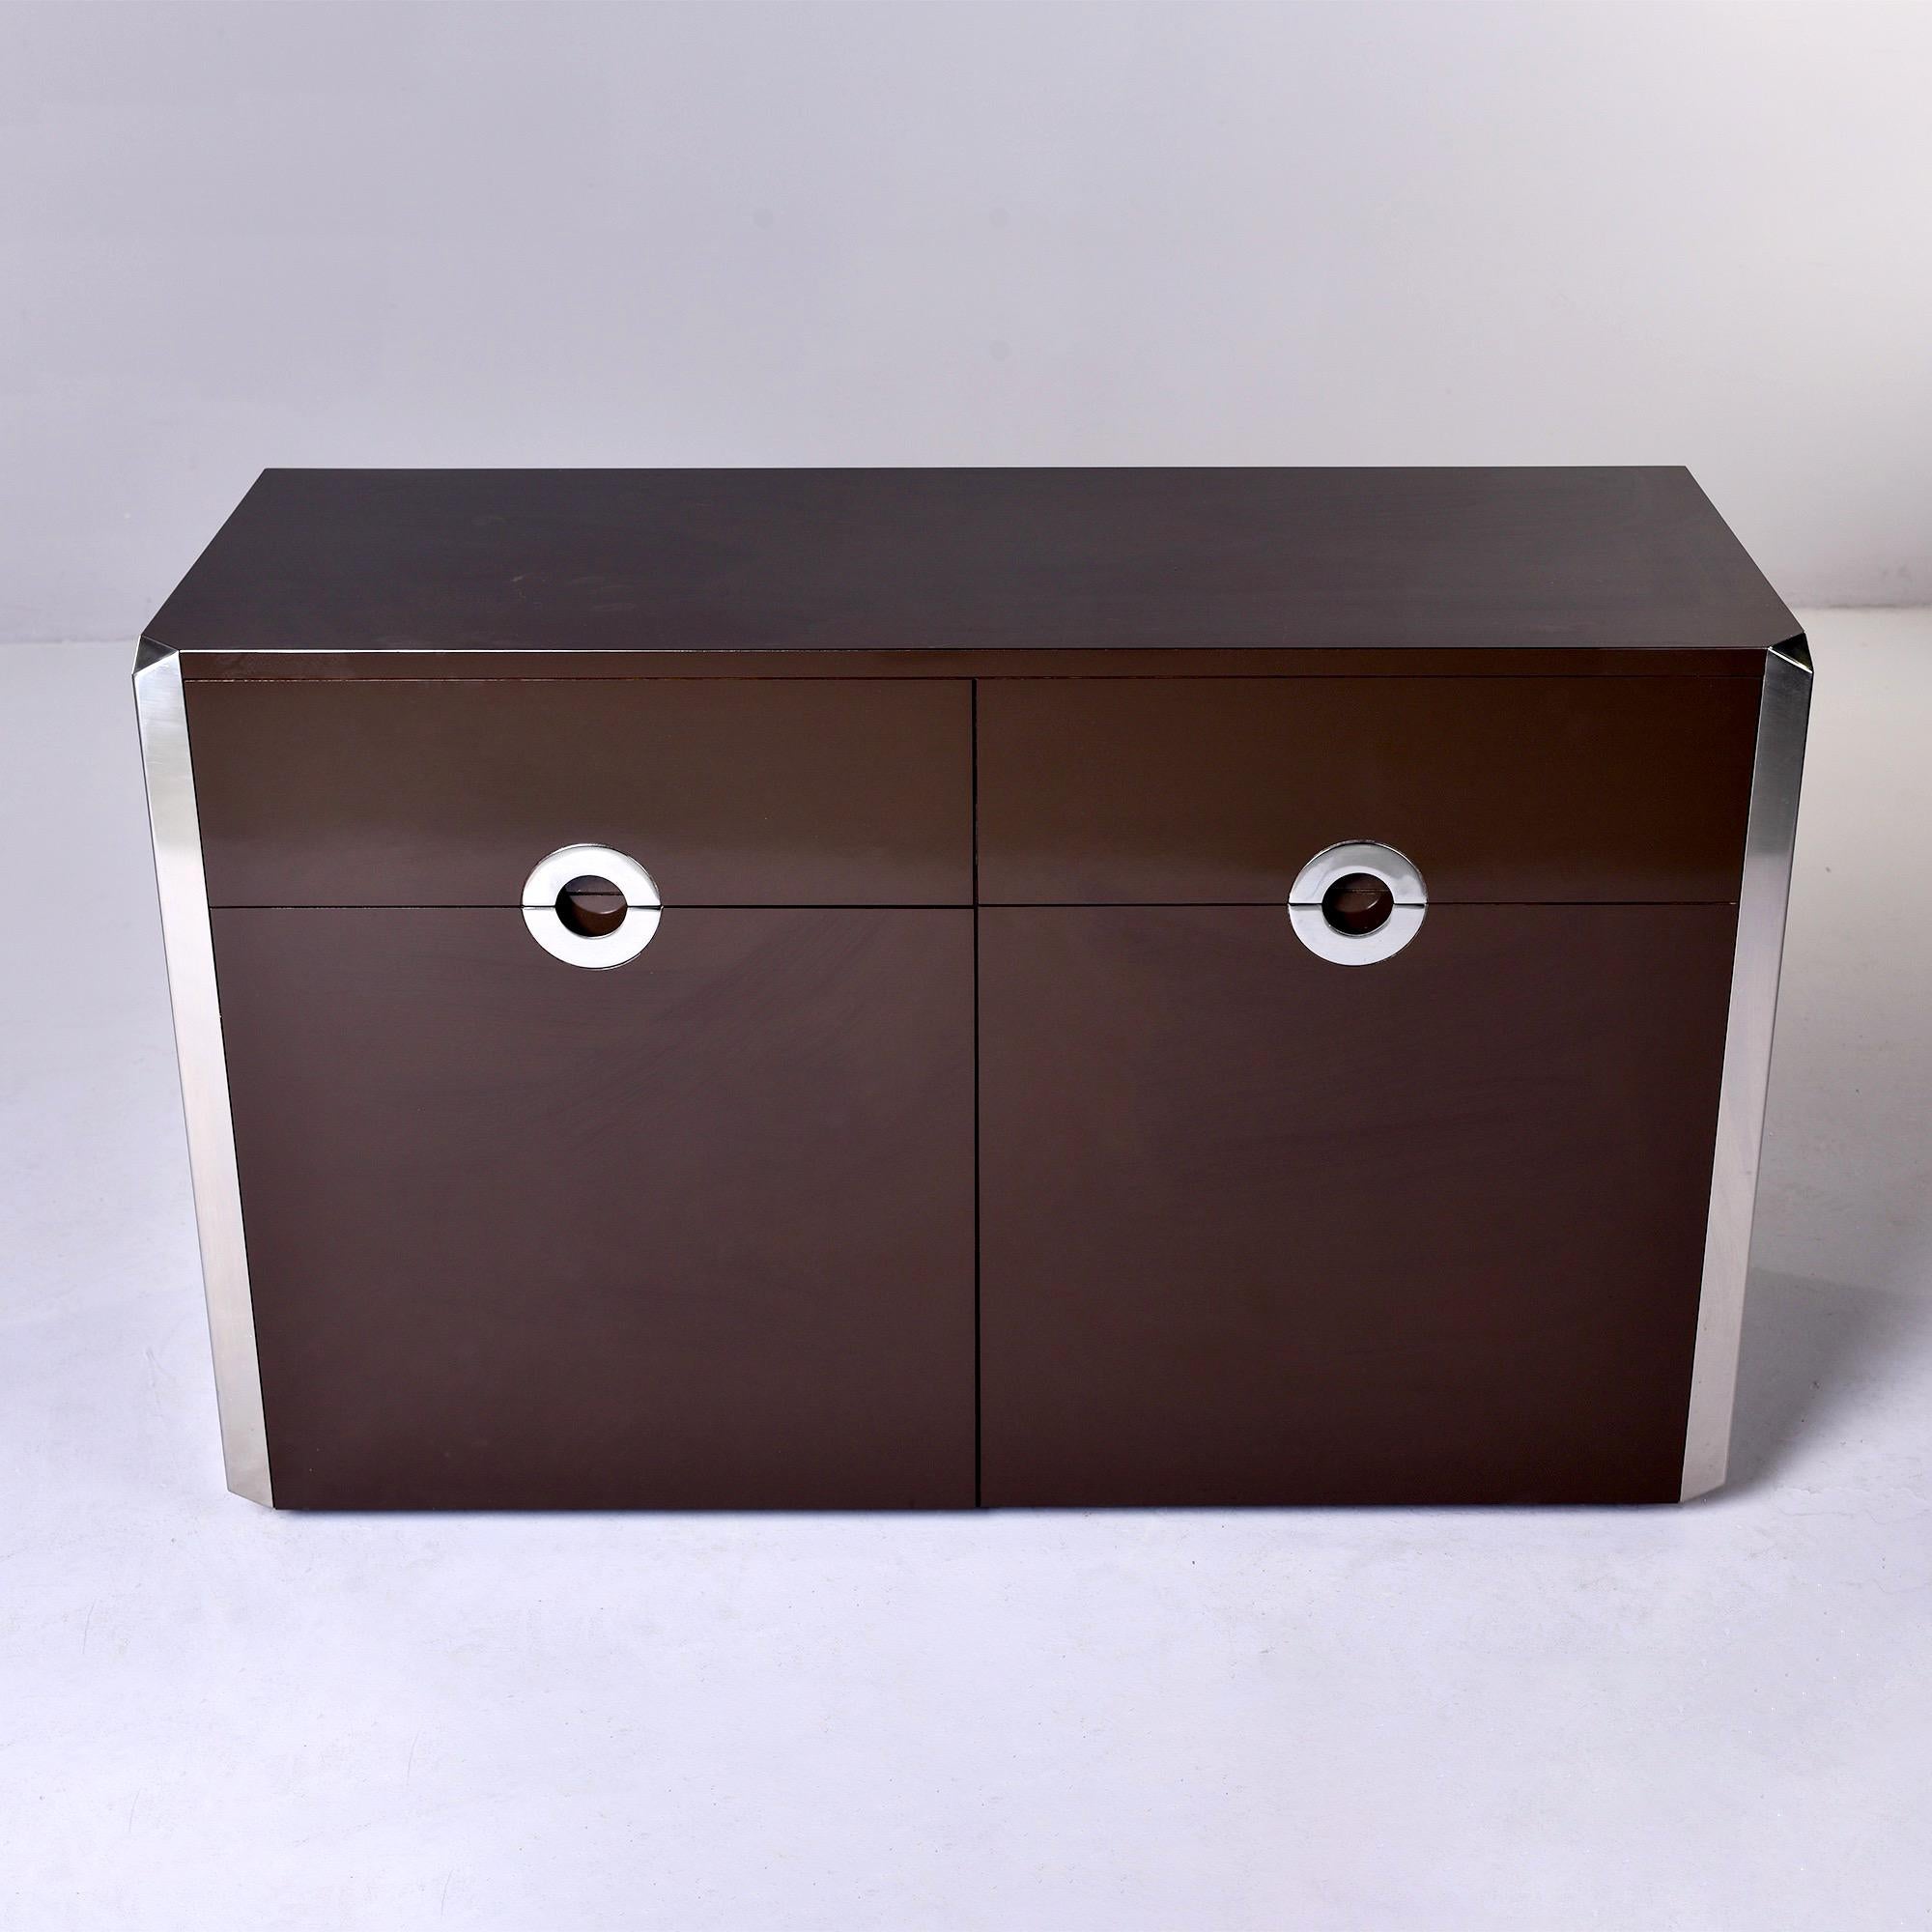 Found in Italy, this cabinet has a dark brown lacquer finish with two drawers over a two door cabinet that opens to divided storage compartment with a single internal shelf on each side. Recessed circle form chrome pulls. Unknown maker.

Very good